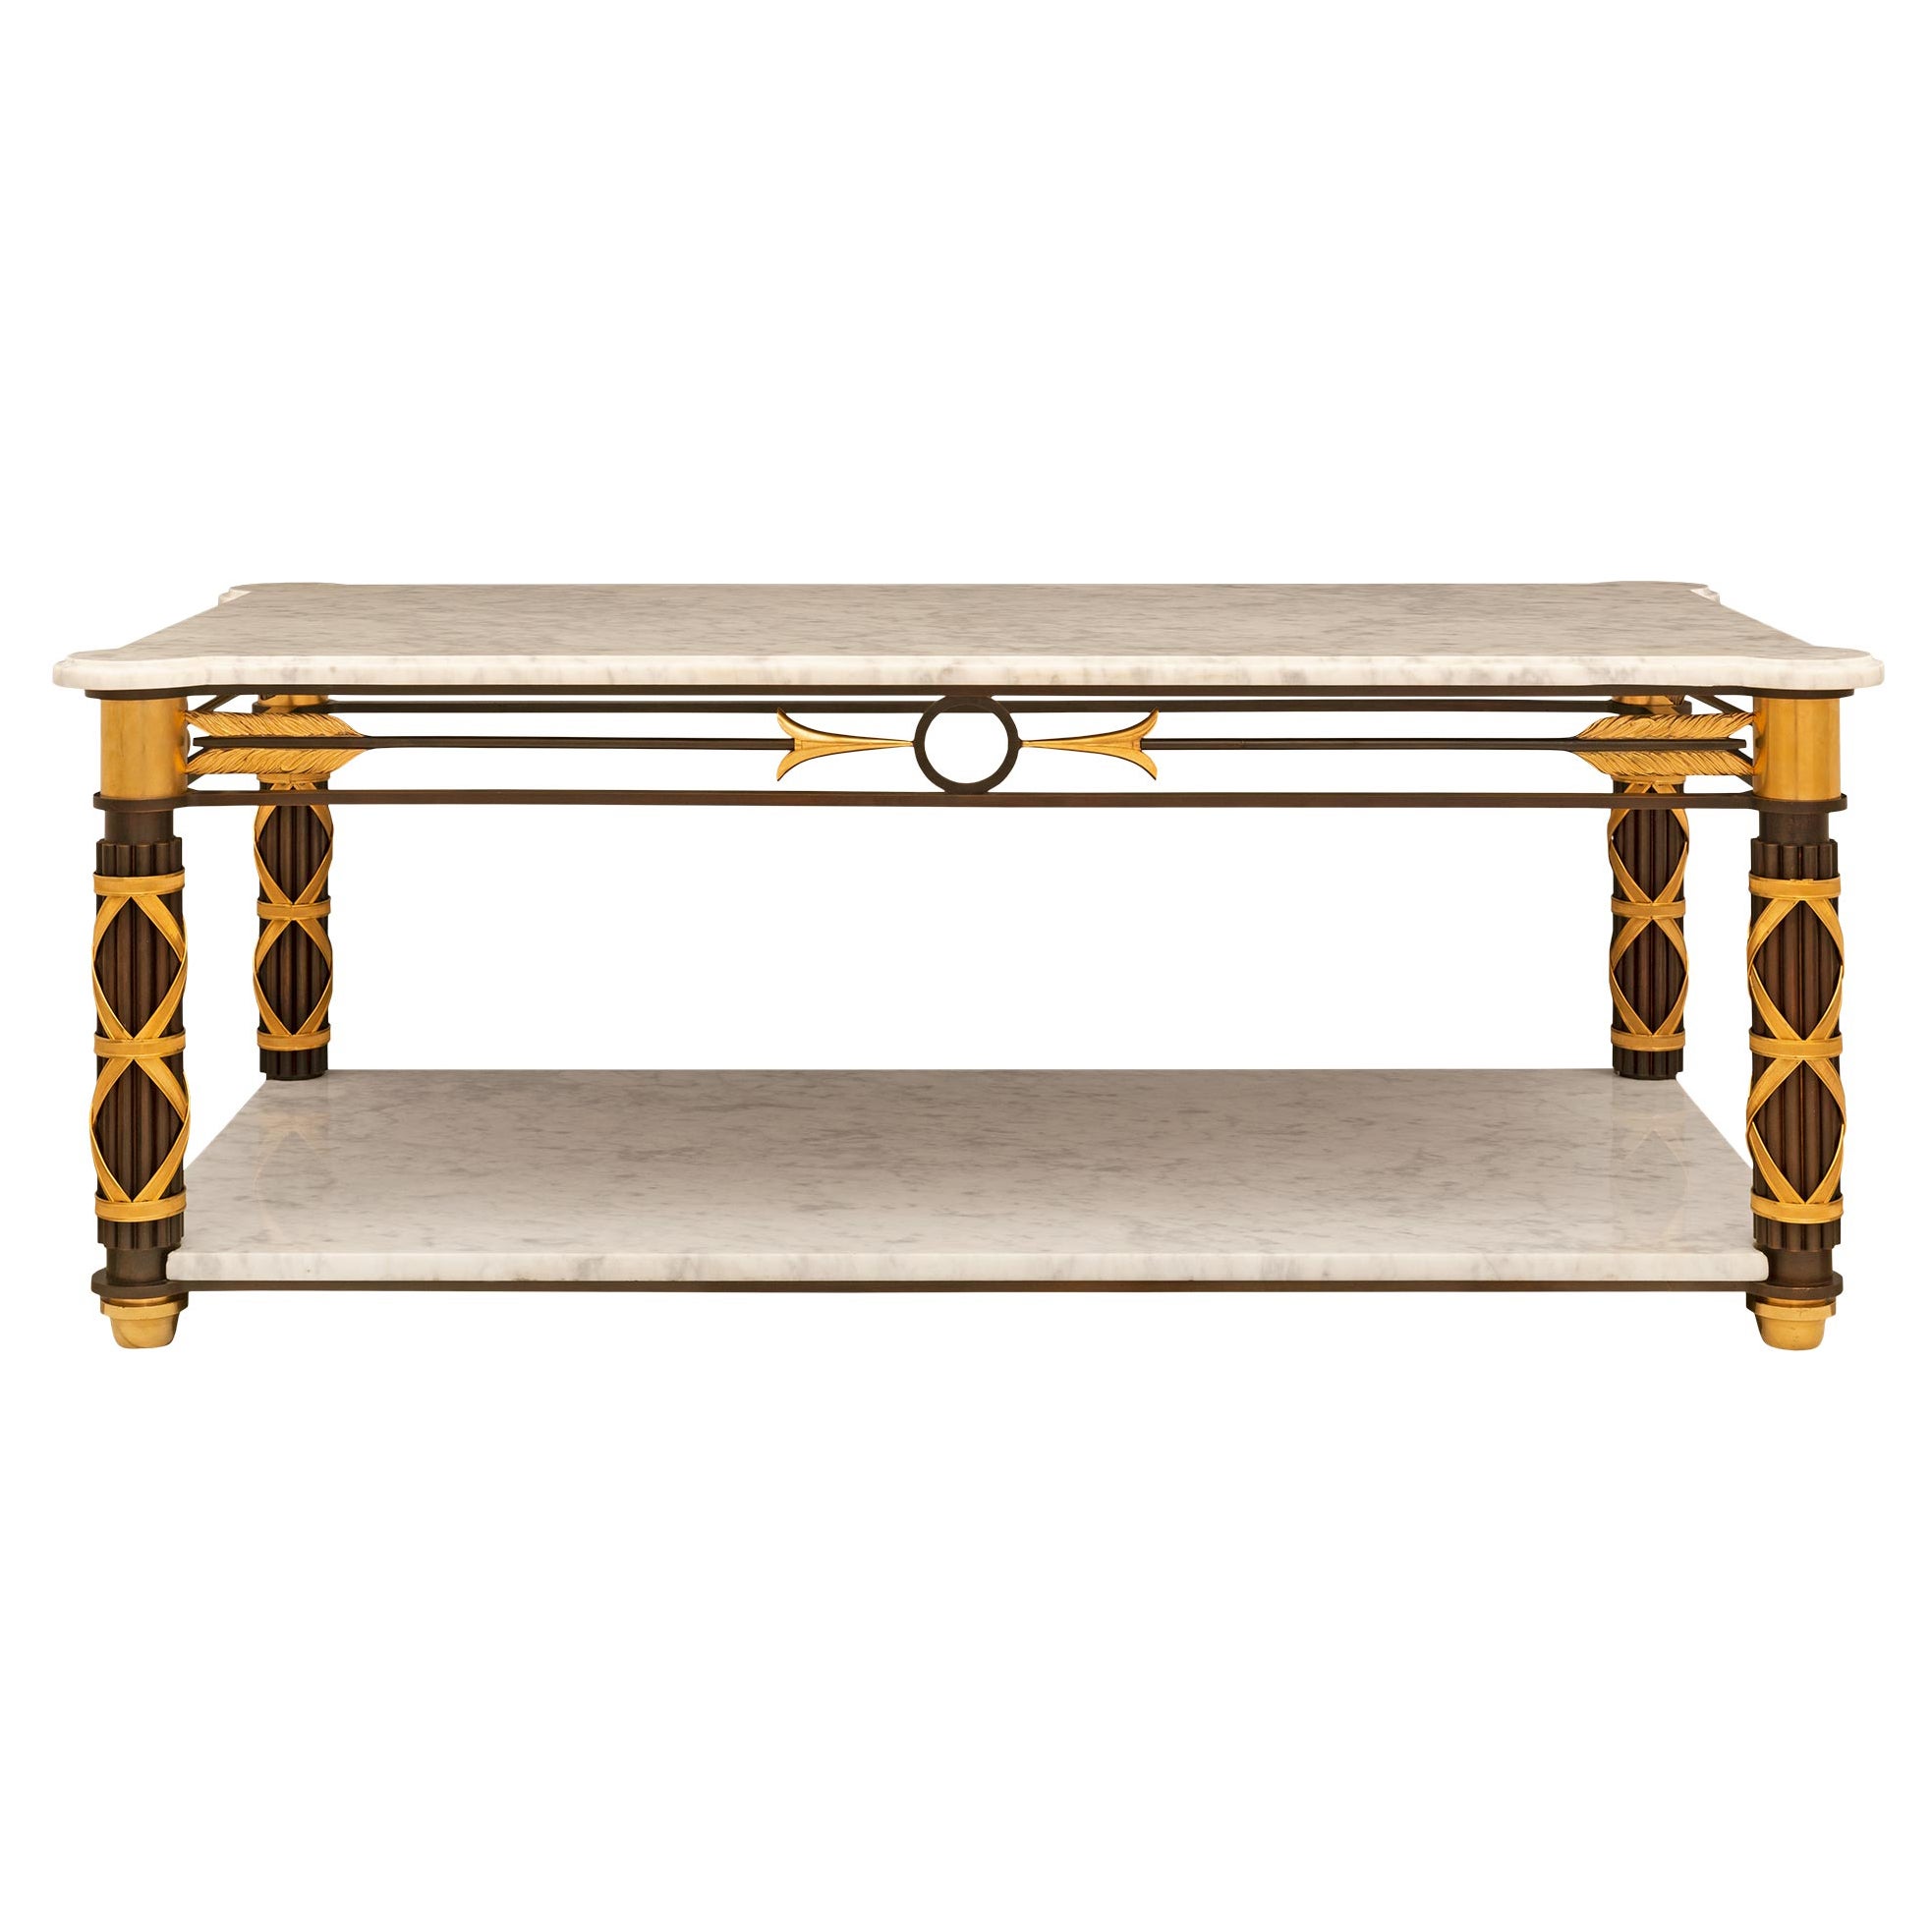 French 19th Century Neoclassical St. Bronze, Ormolu And Marble Console Table